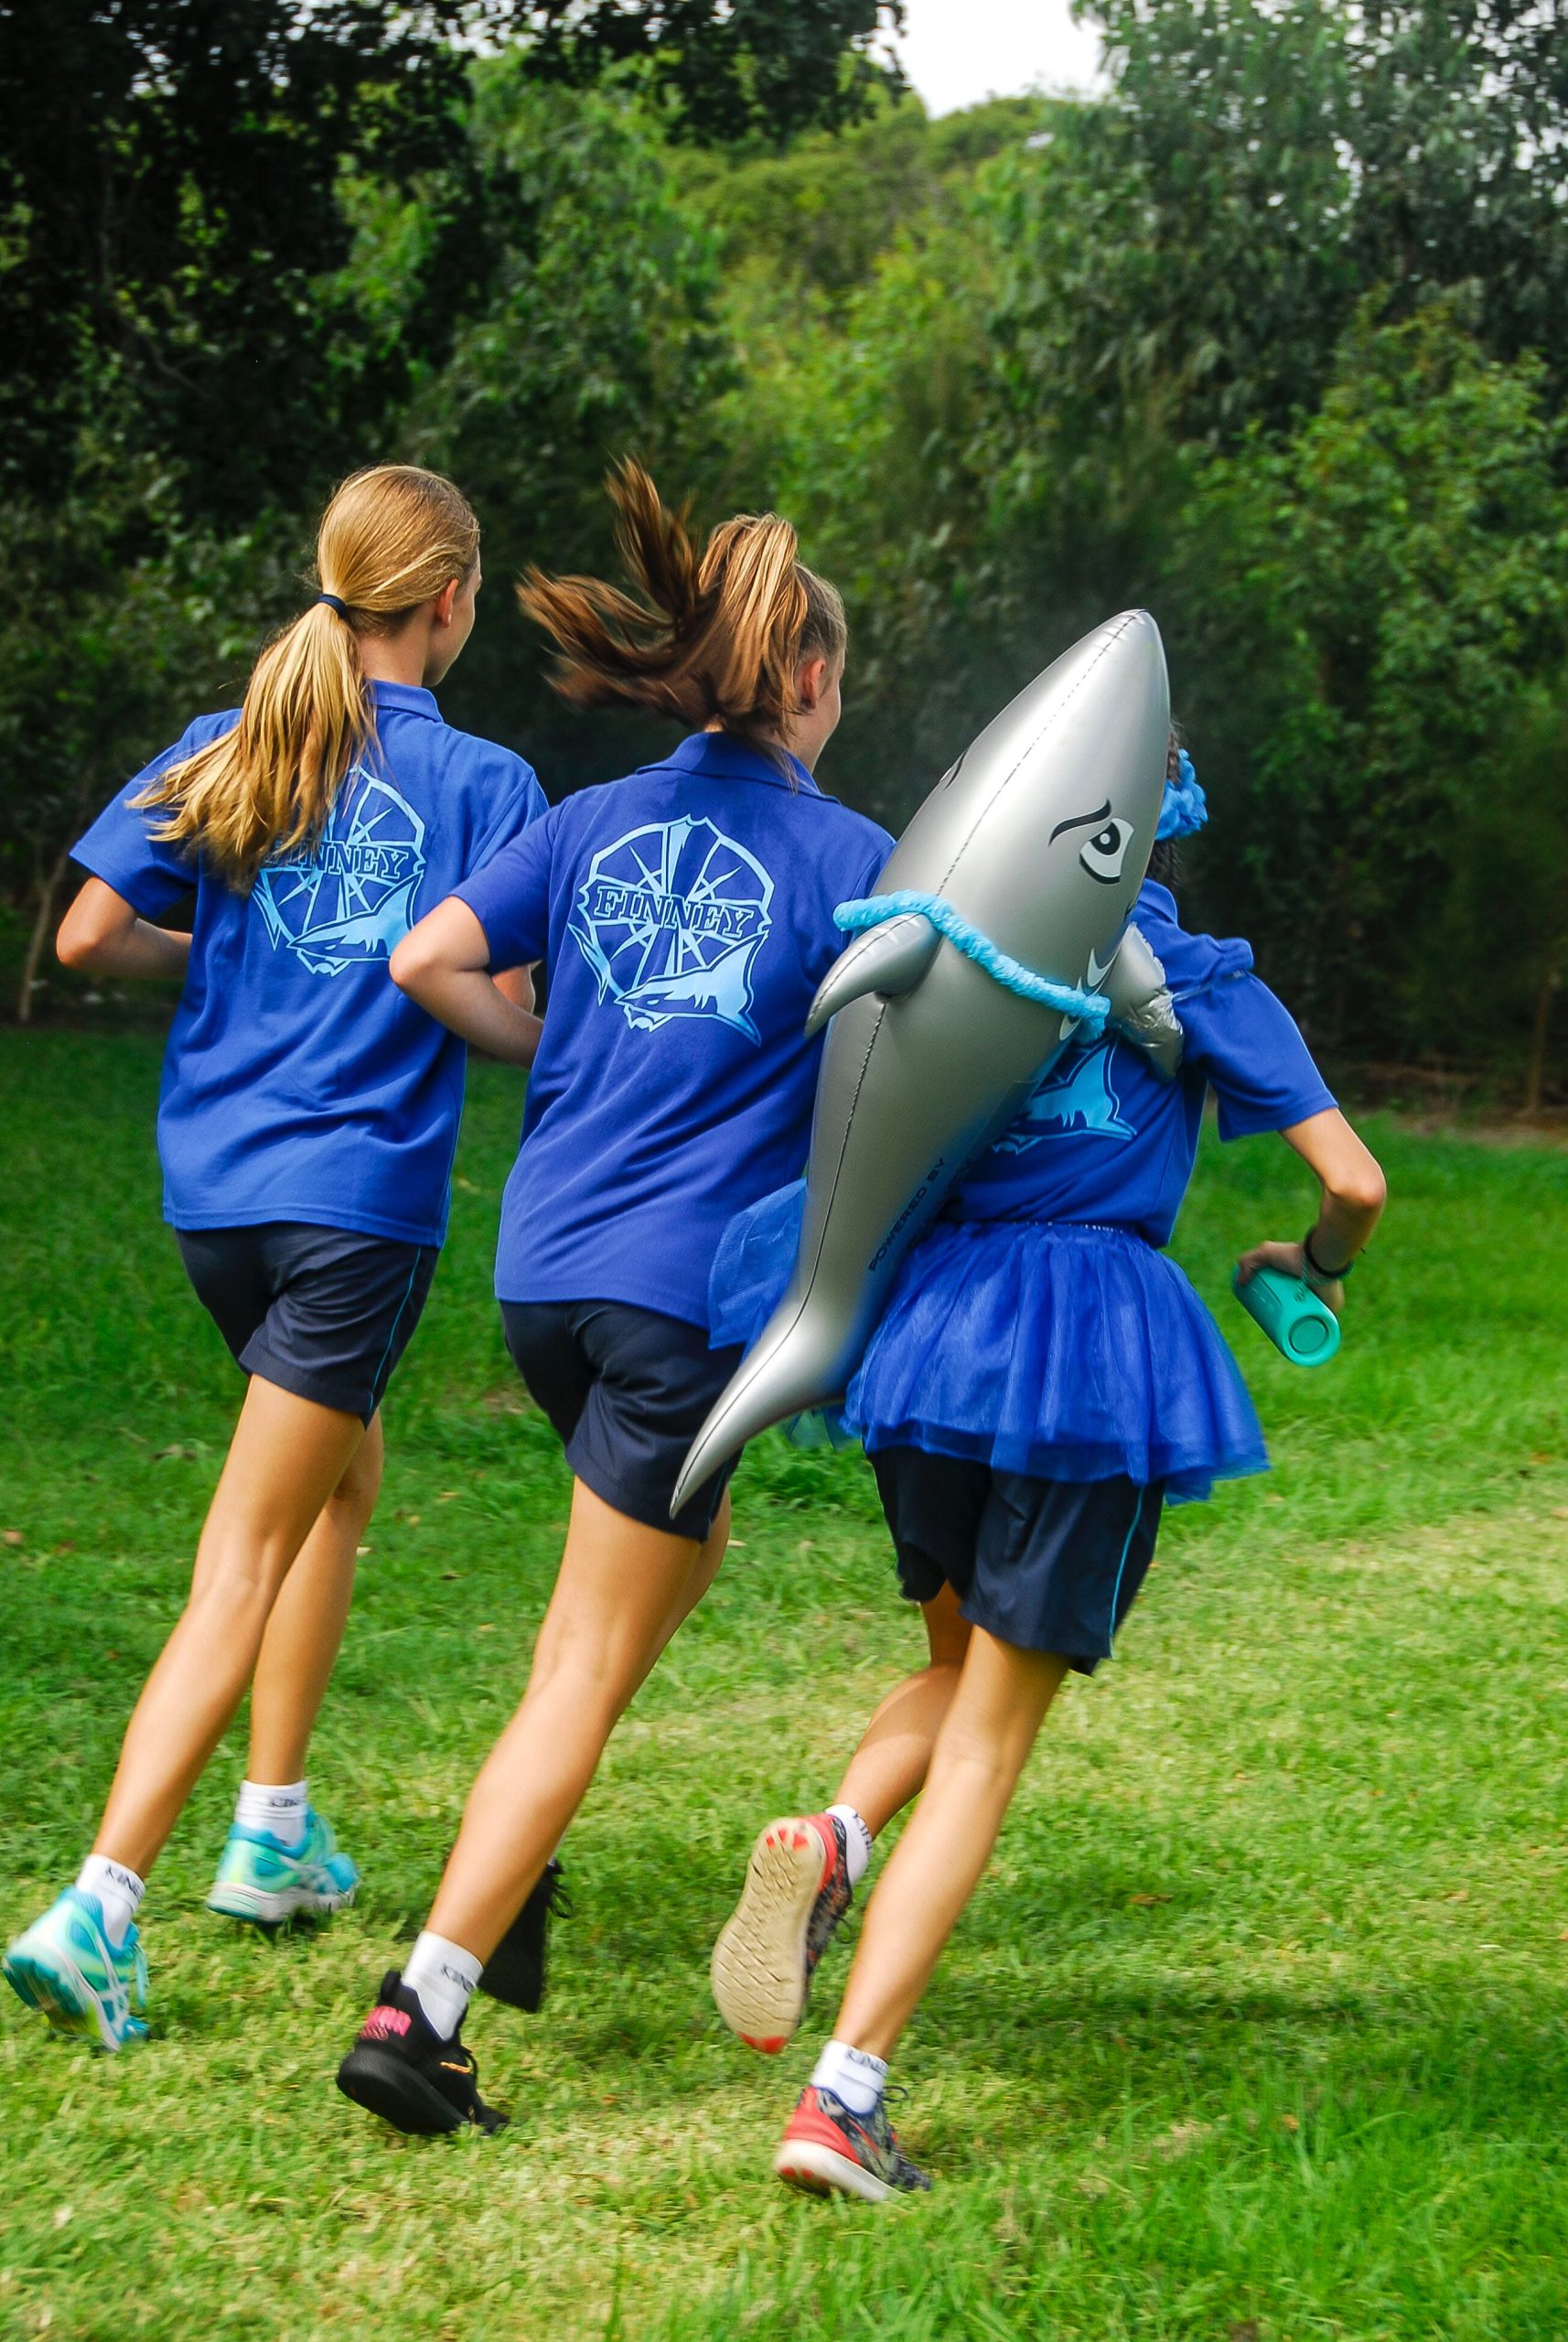 Three girls running in a field with a shark on their backs.